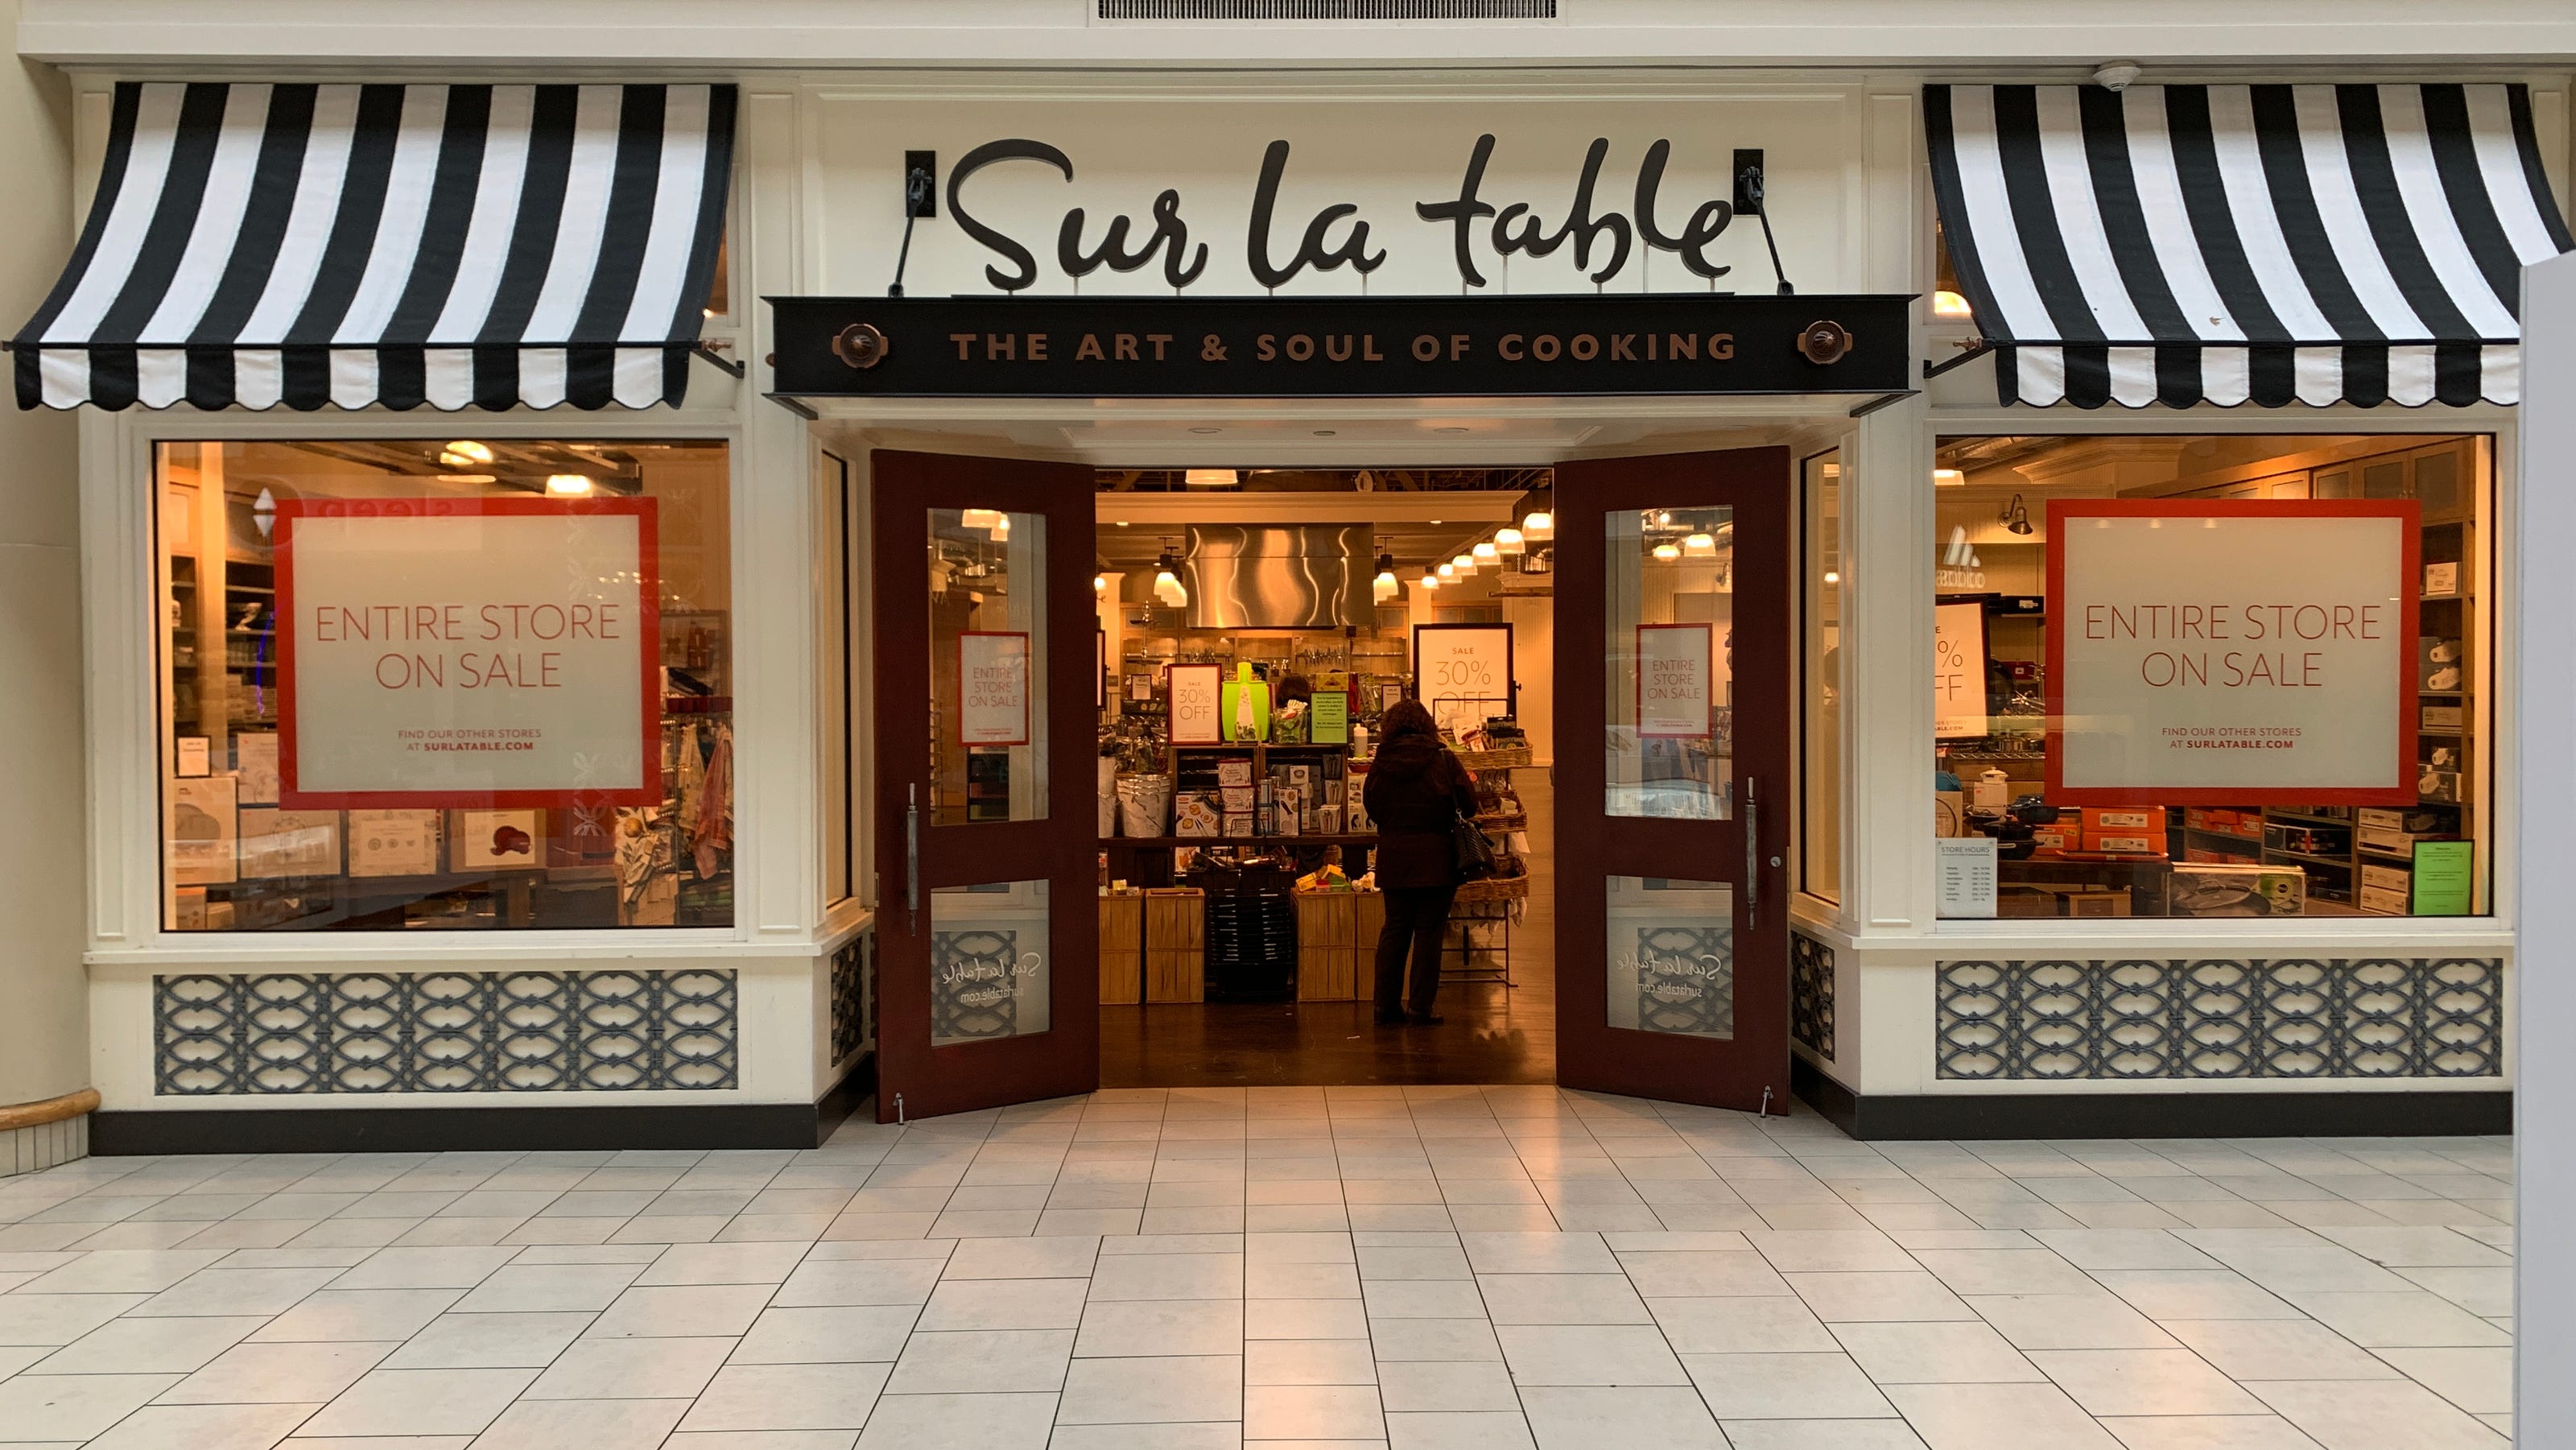 Which Sur La Table locations are closing; where are the sales?